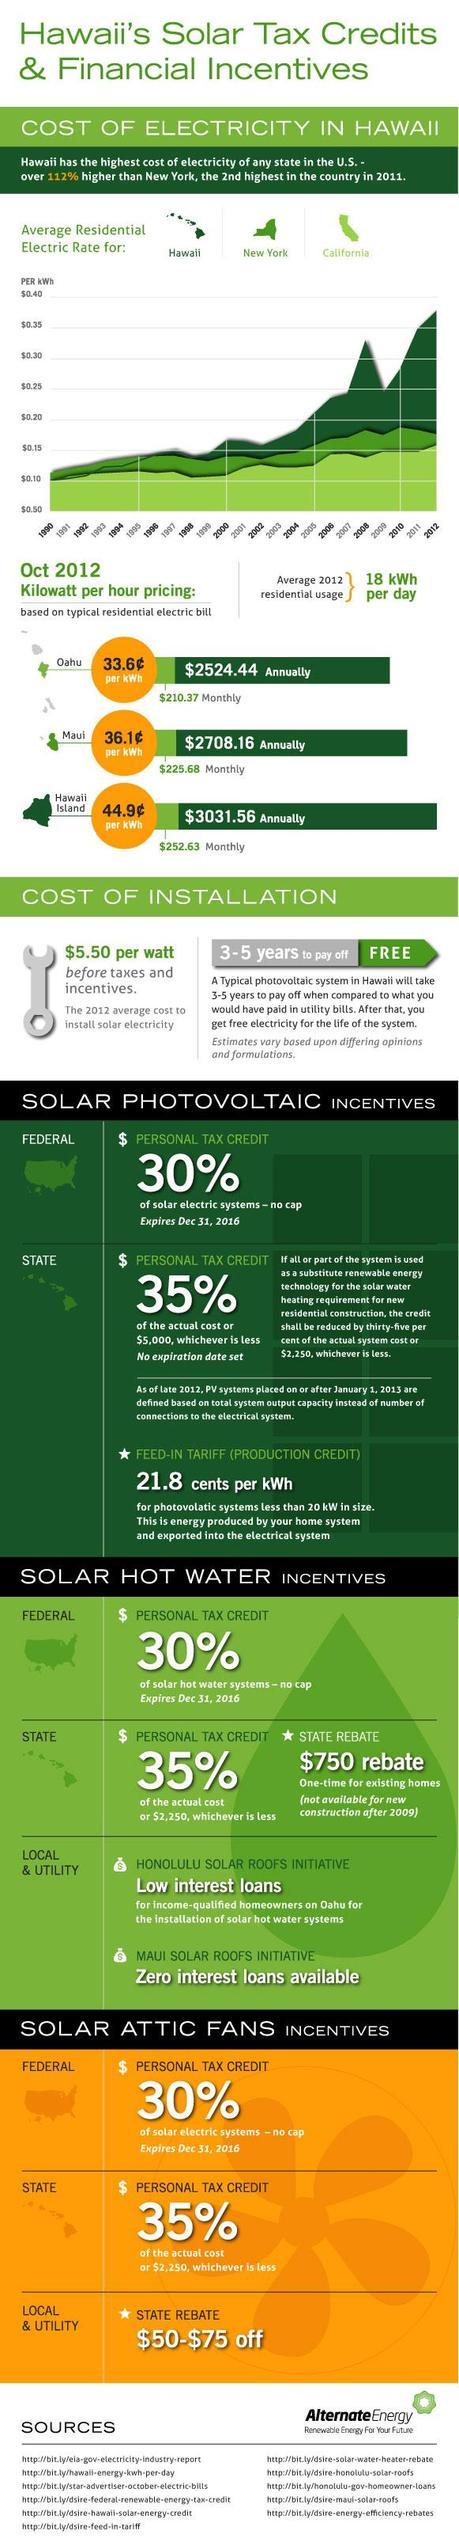 Guide To Solar Tax Credits & Incentives for Hawaii Infographic